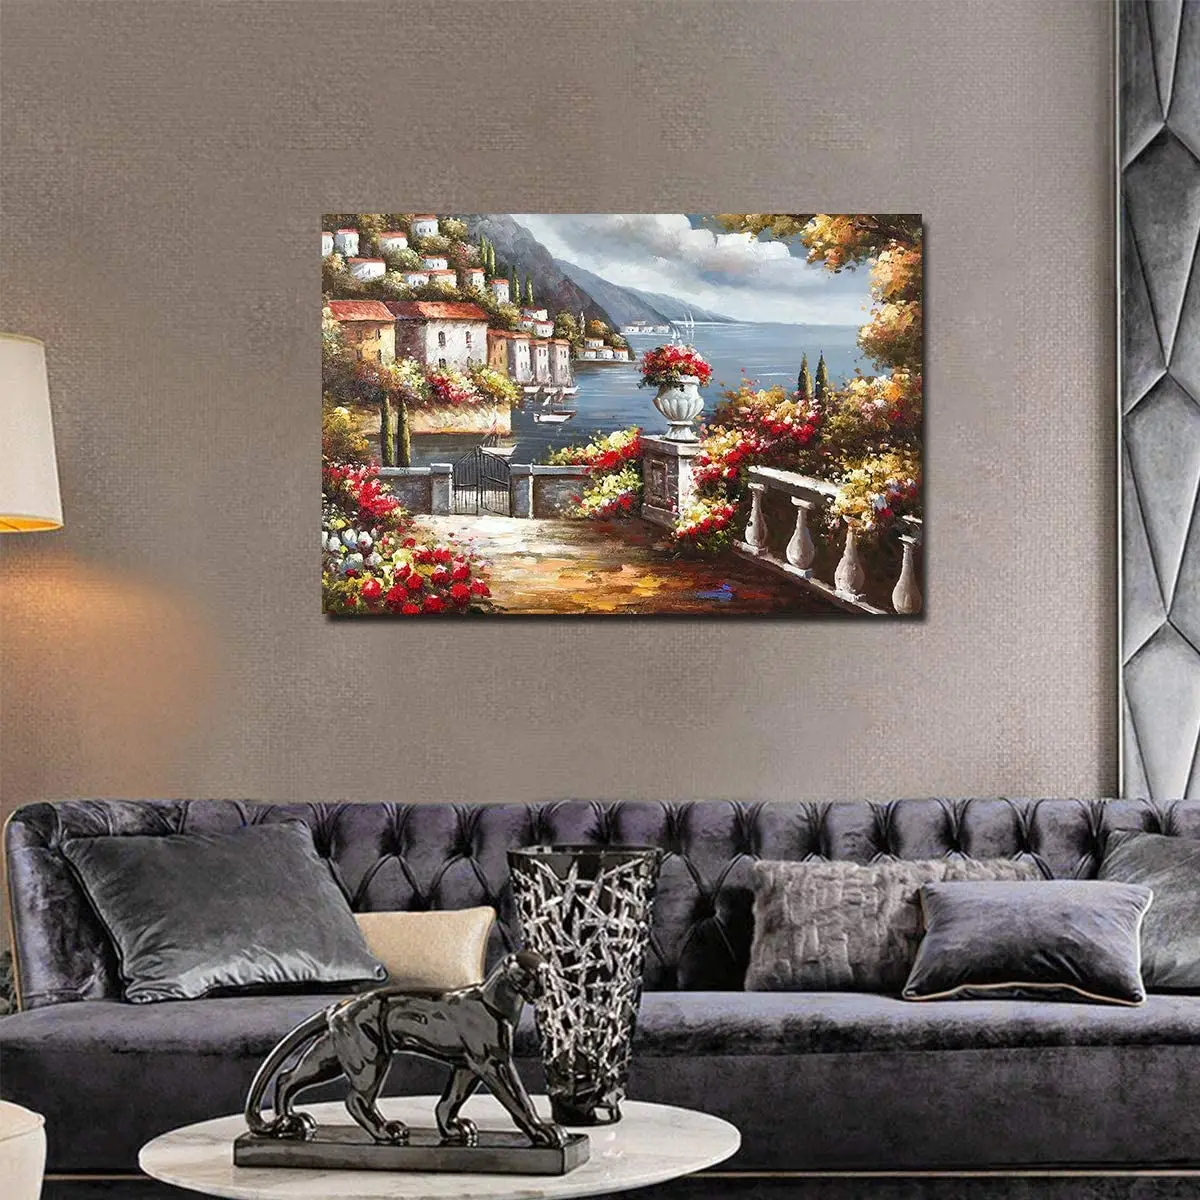 

100% Hand Painted Canvas Wall Art Italy Town Mediterranean Tuscany Sea Coast Flowers Oil Painting Landscape Scenery Wall Decor